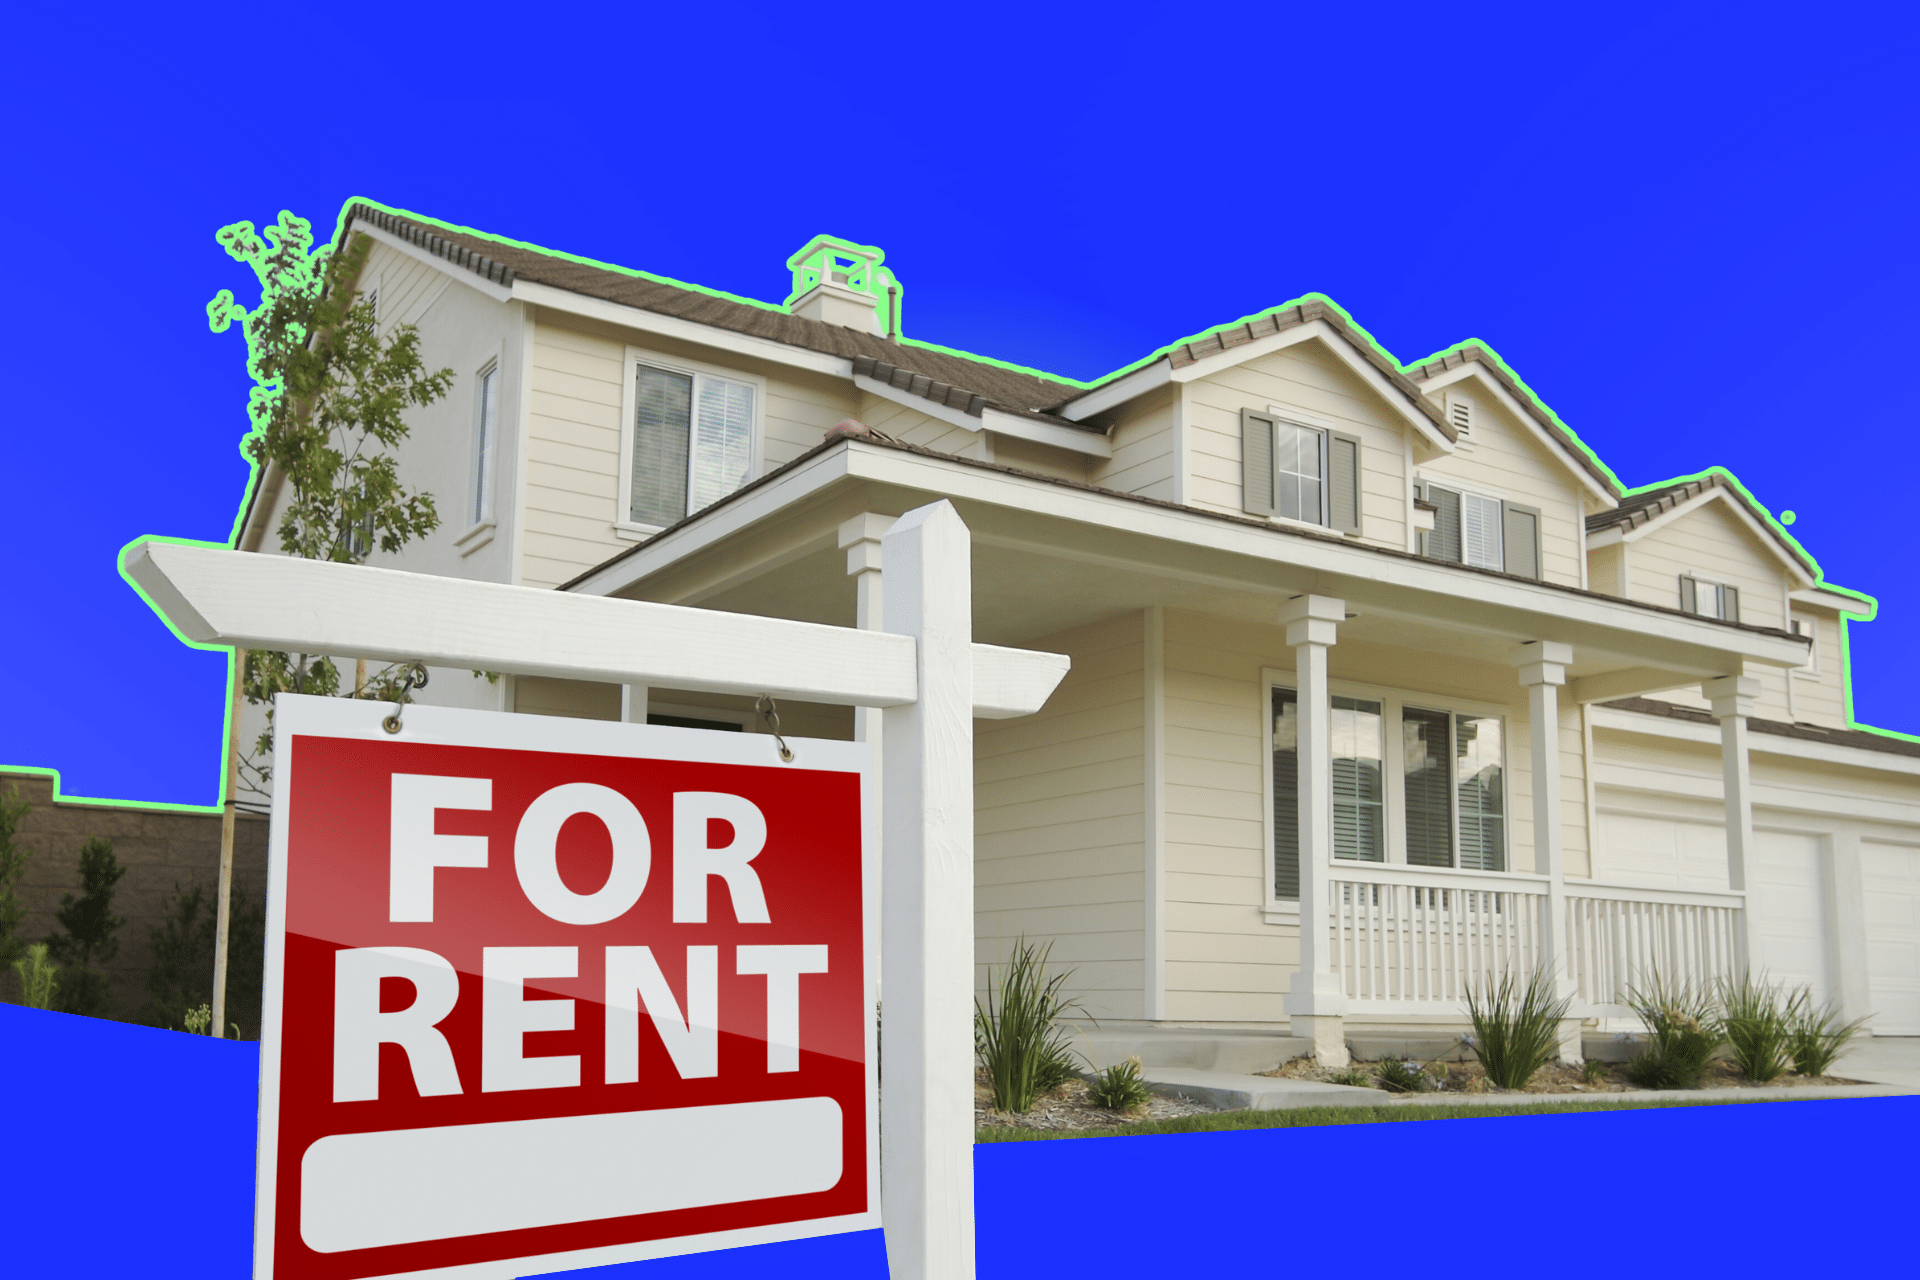 How to Save Money on Your Rent